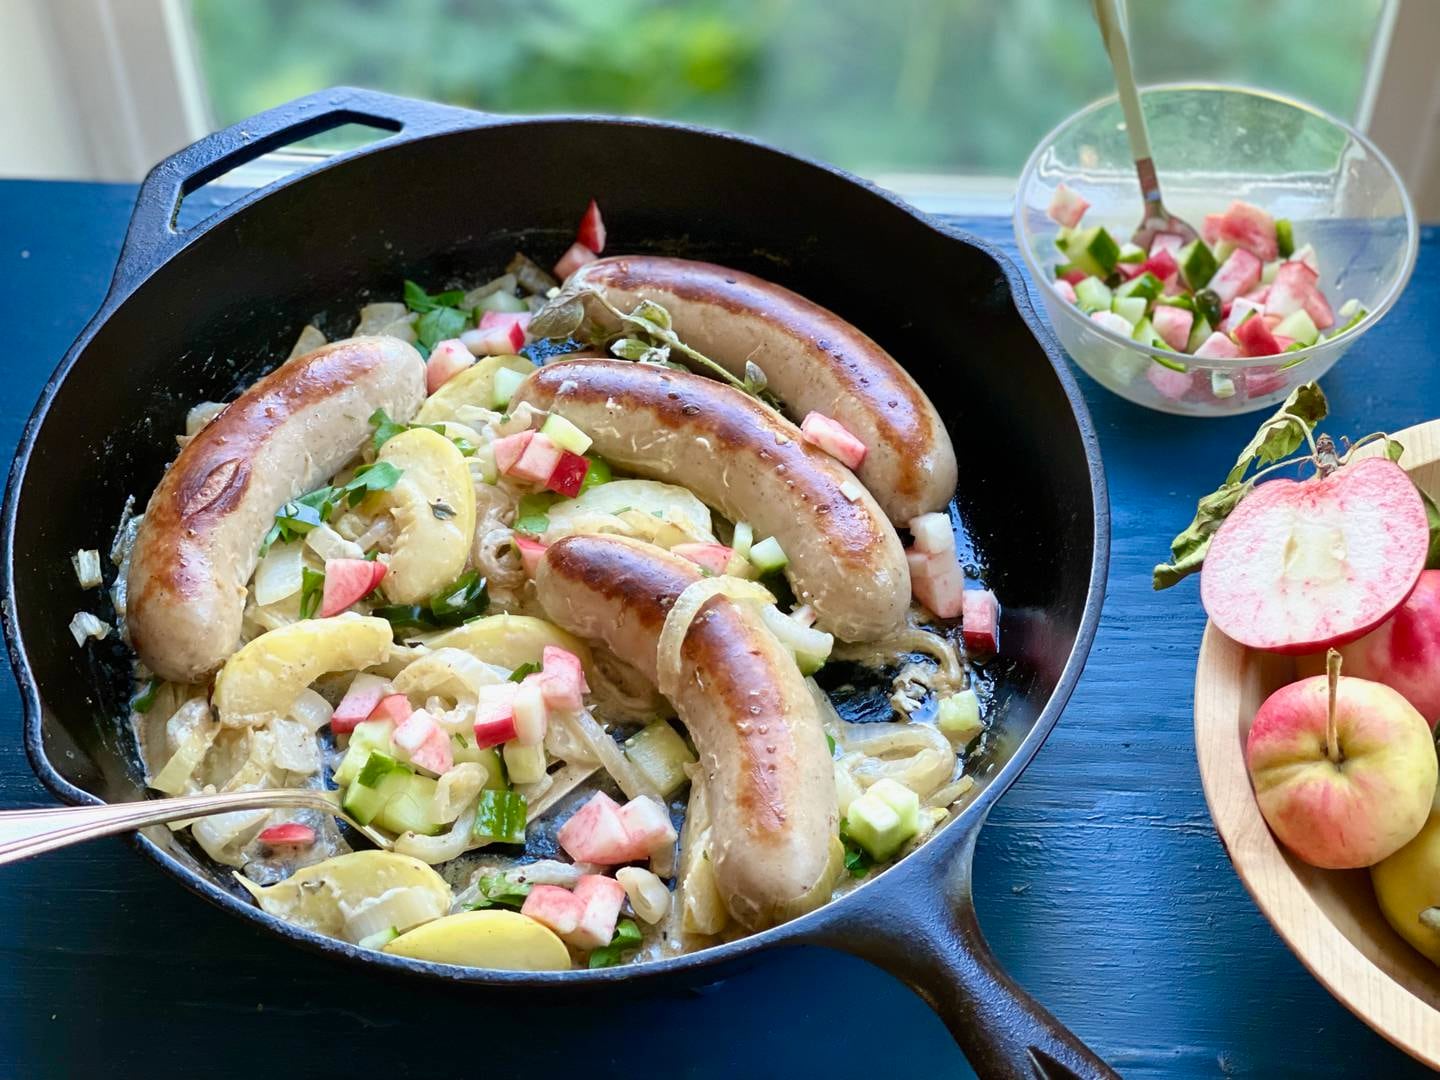 Roasted sausages and apples with onion and apple salsa.